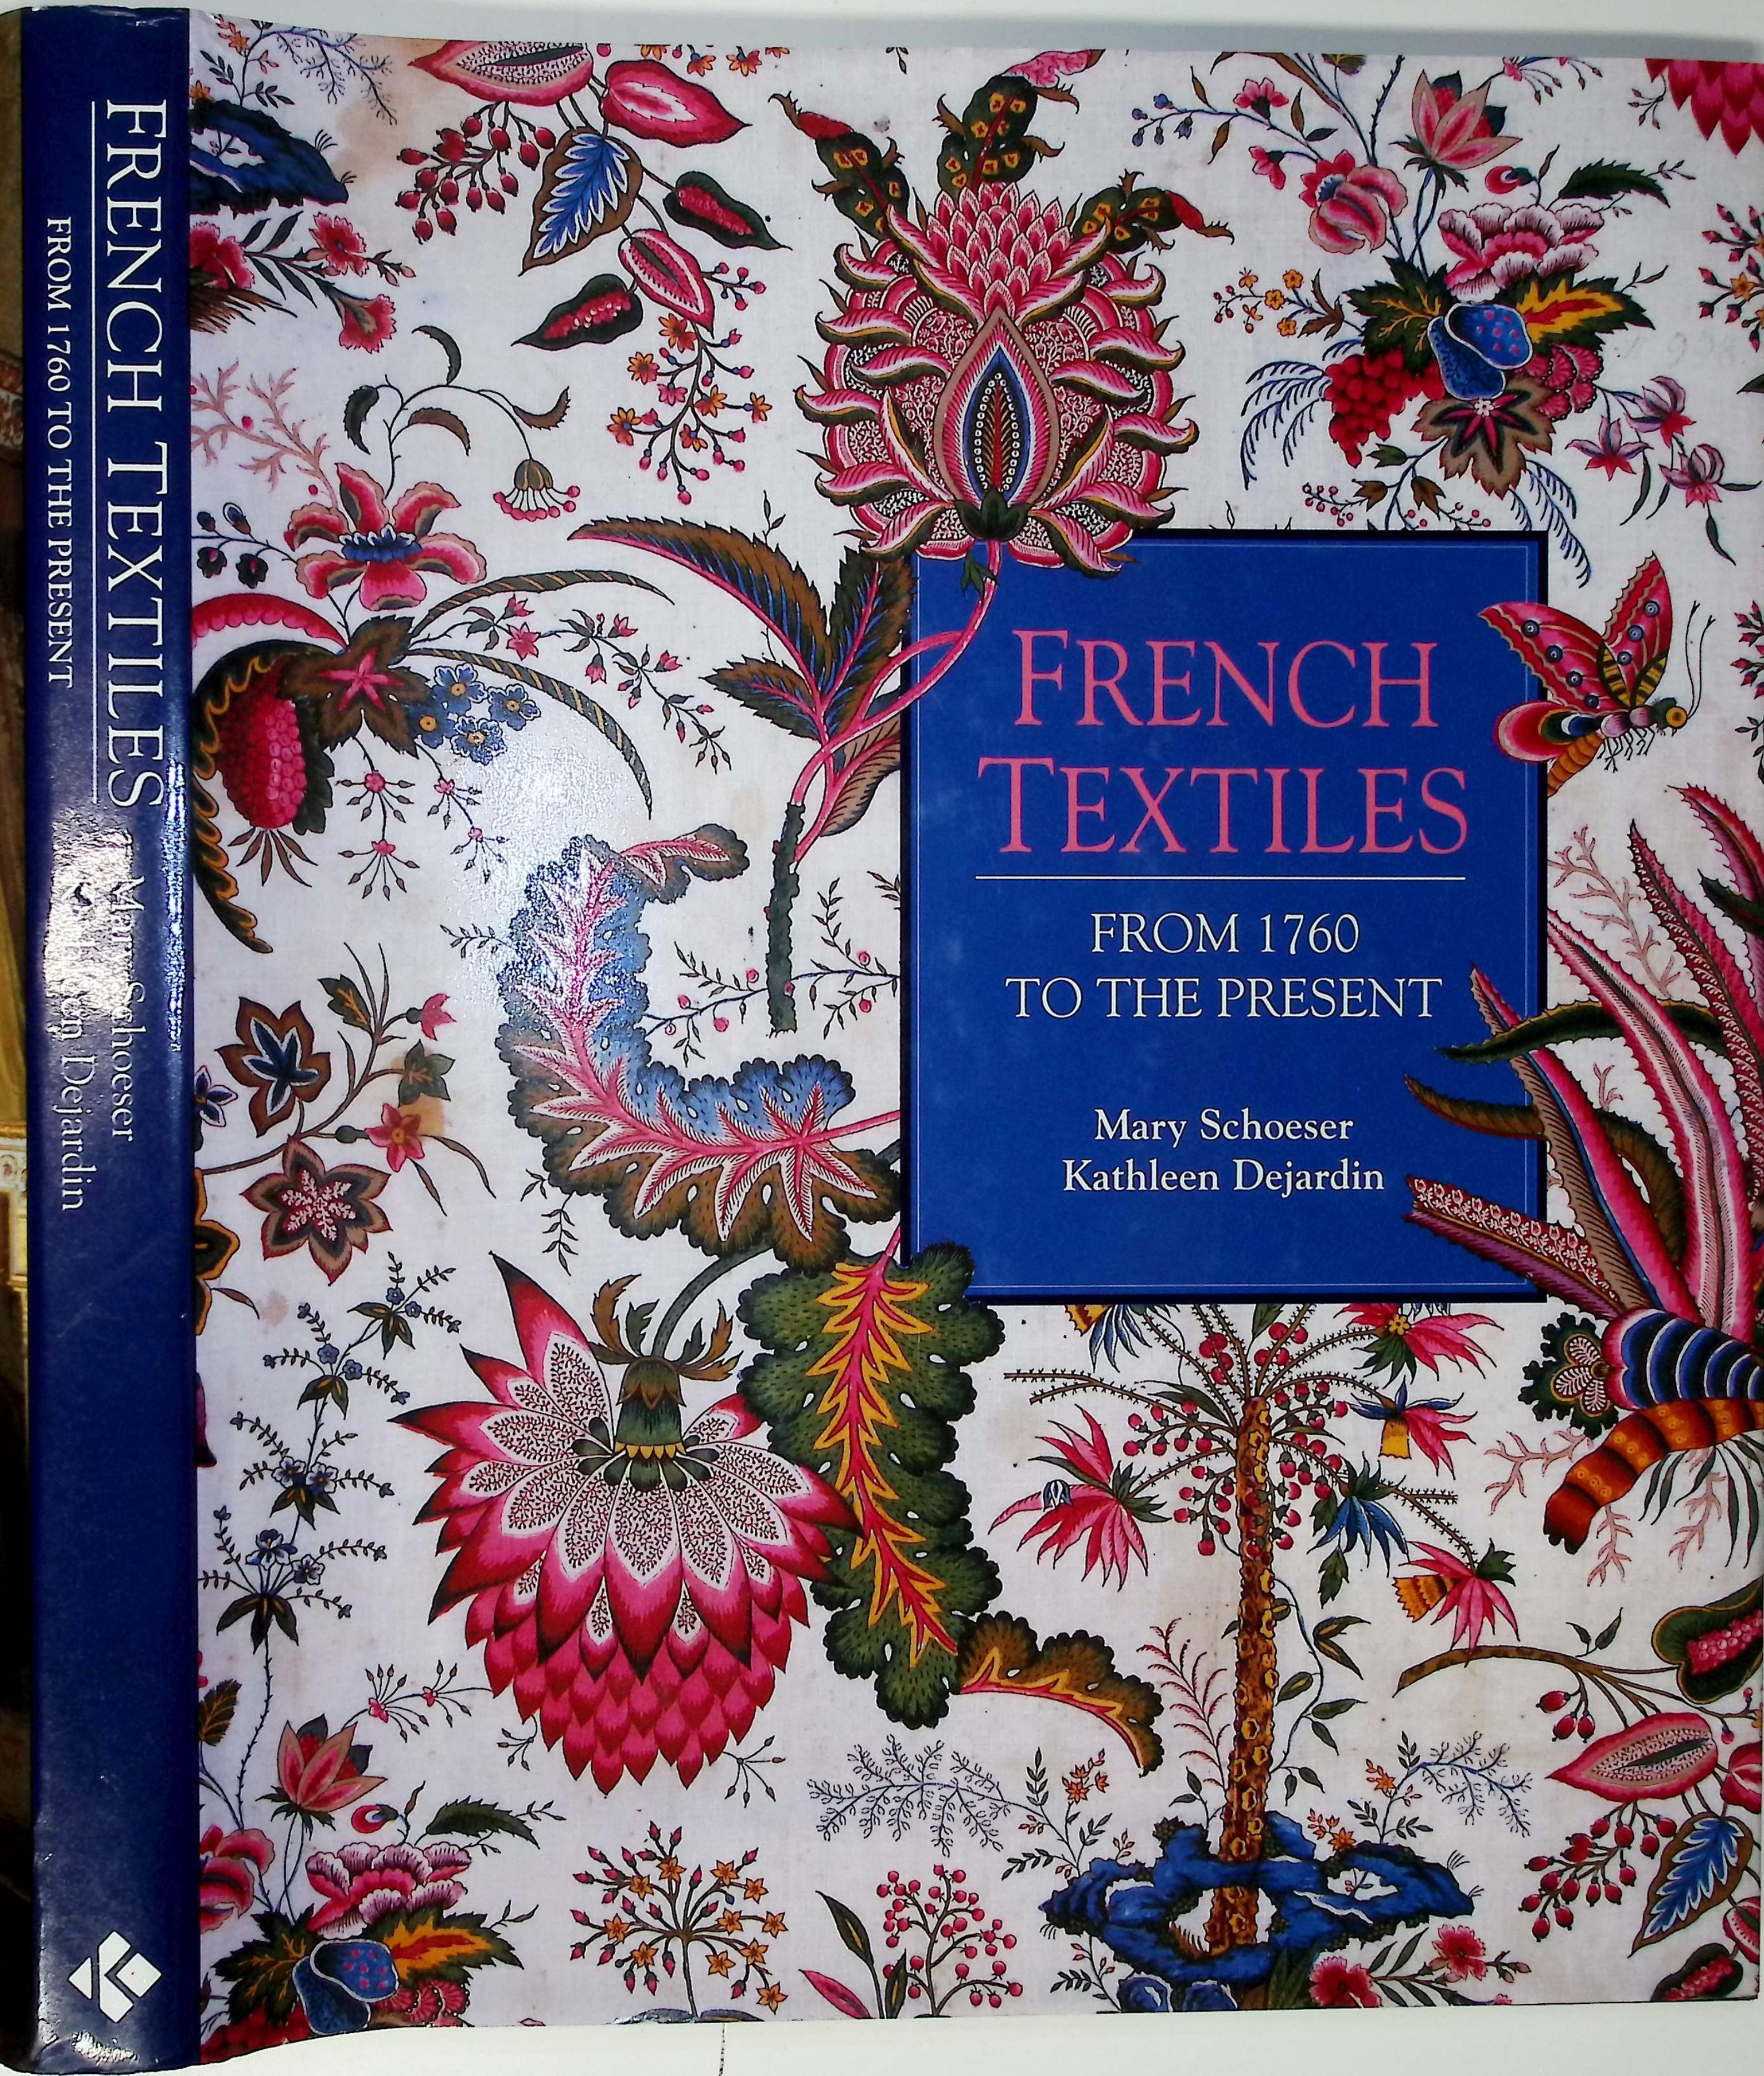 French Textiles from 1760 to the Present